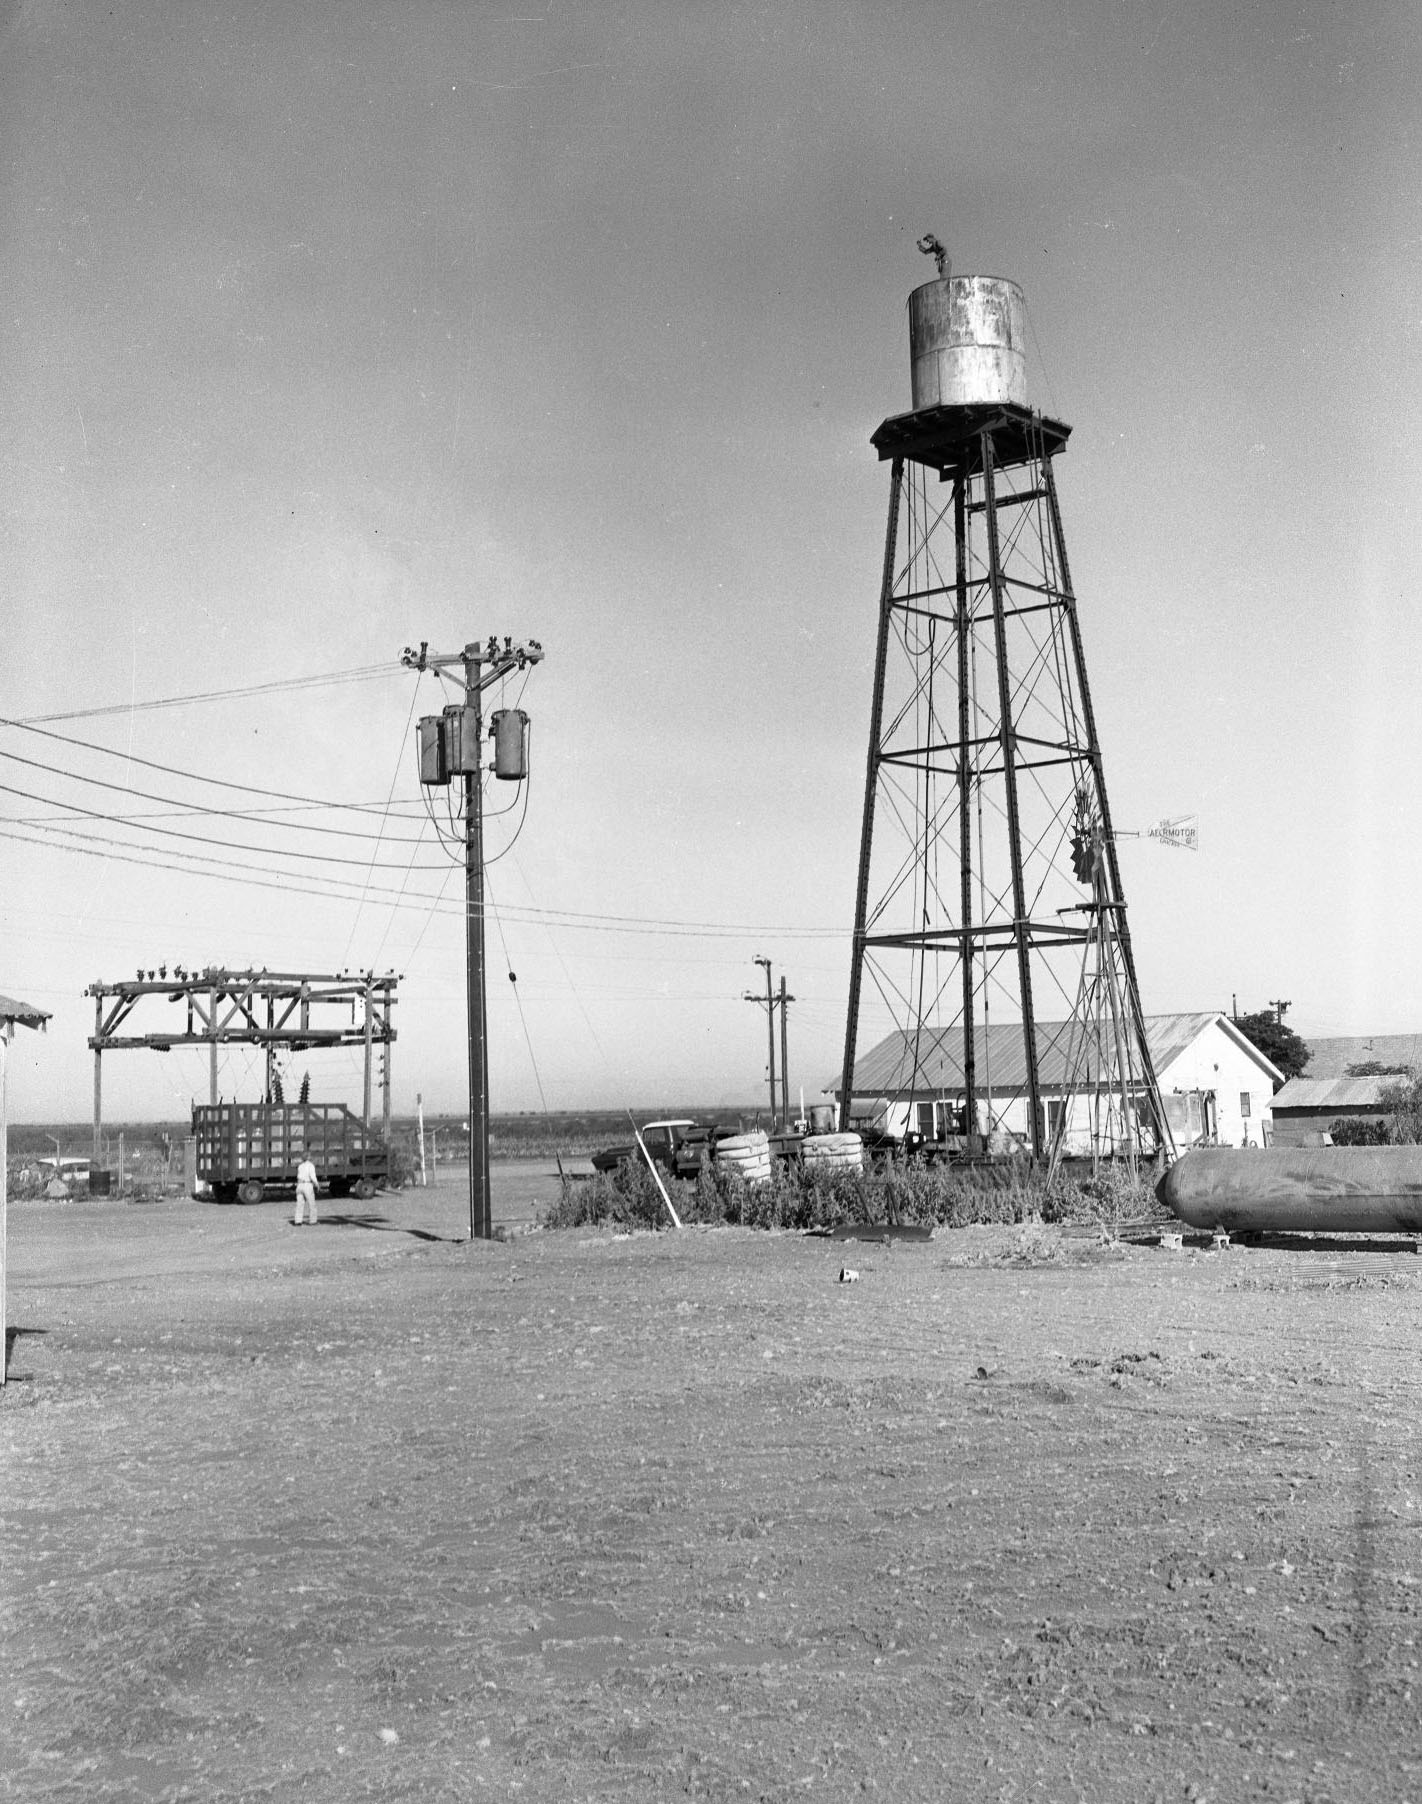 Water Tower at Cotton Gin, 1958